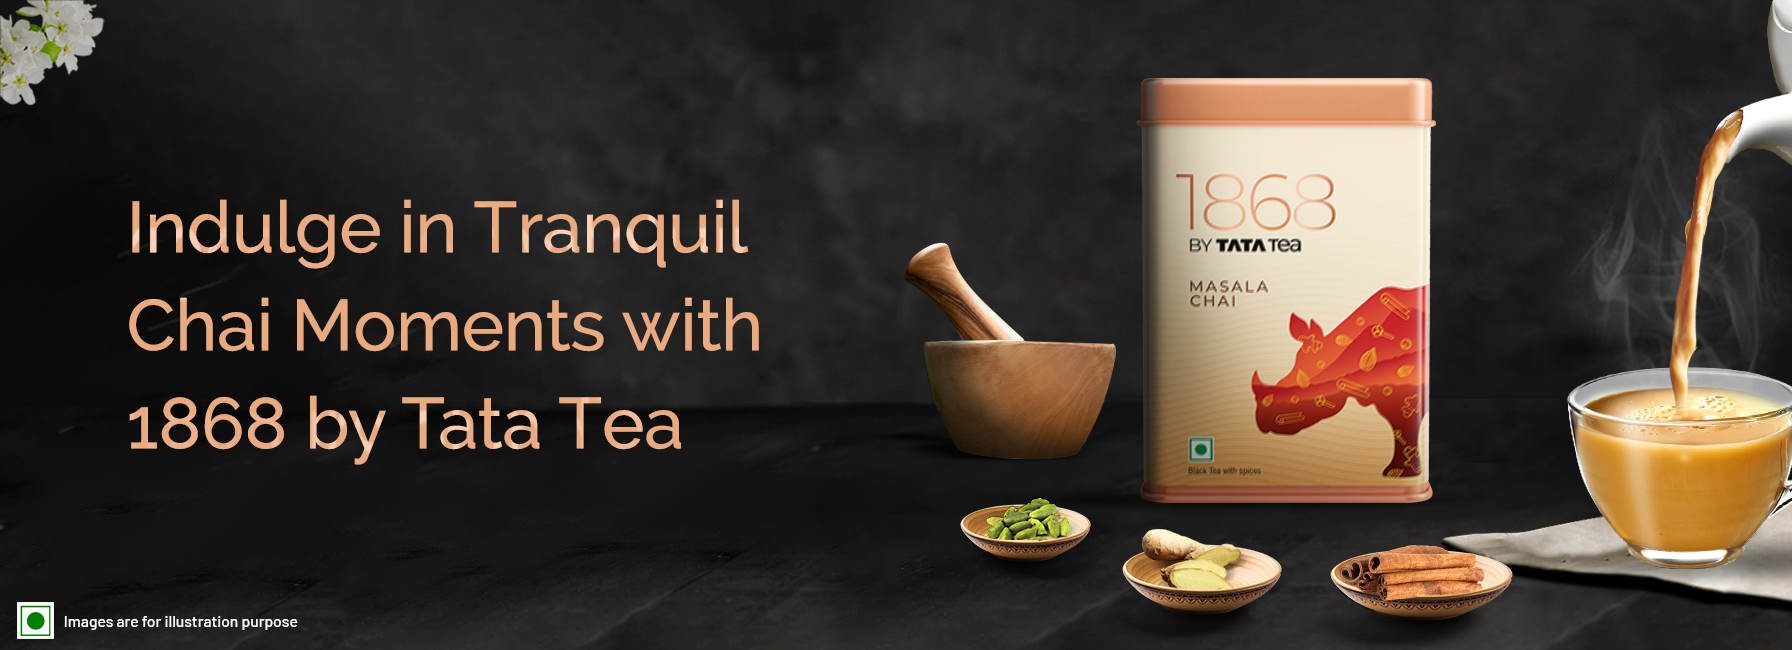 Indulge in Tranquil Chai Moments with 1868 by Tata Tea